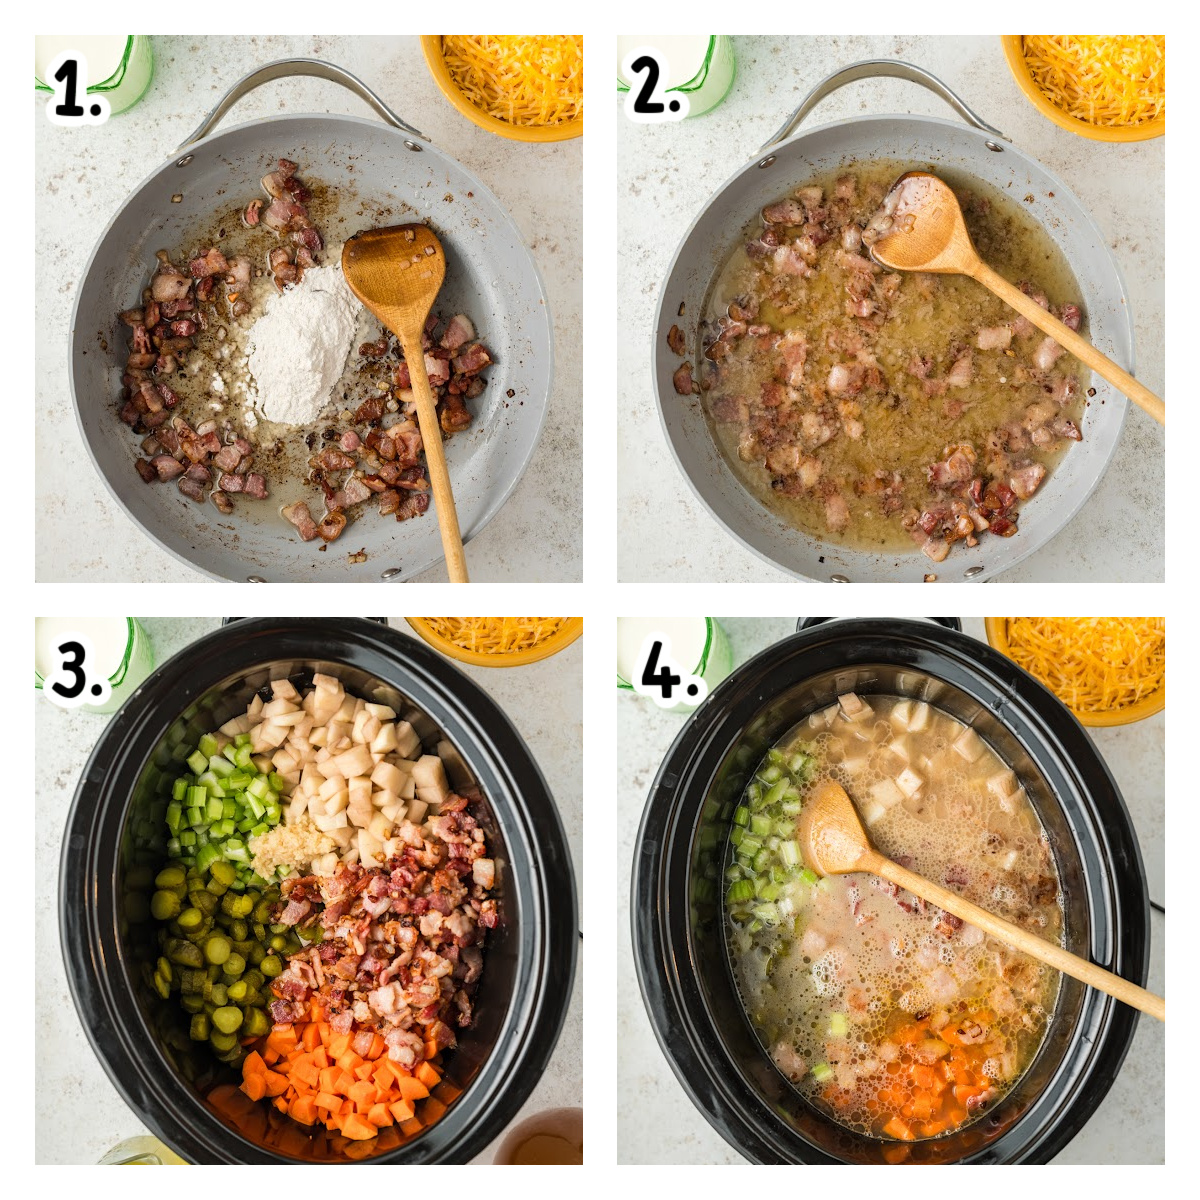 Four images showing how to make dill pickle soup in a slow cooker.